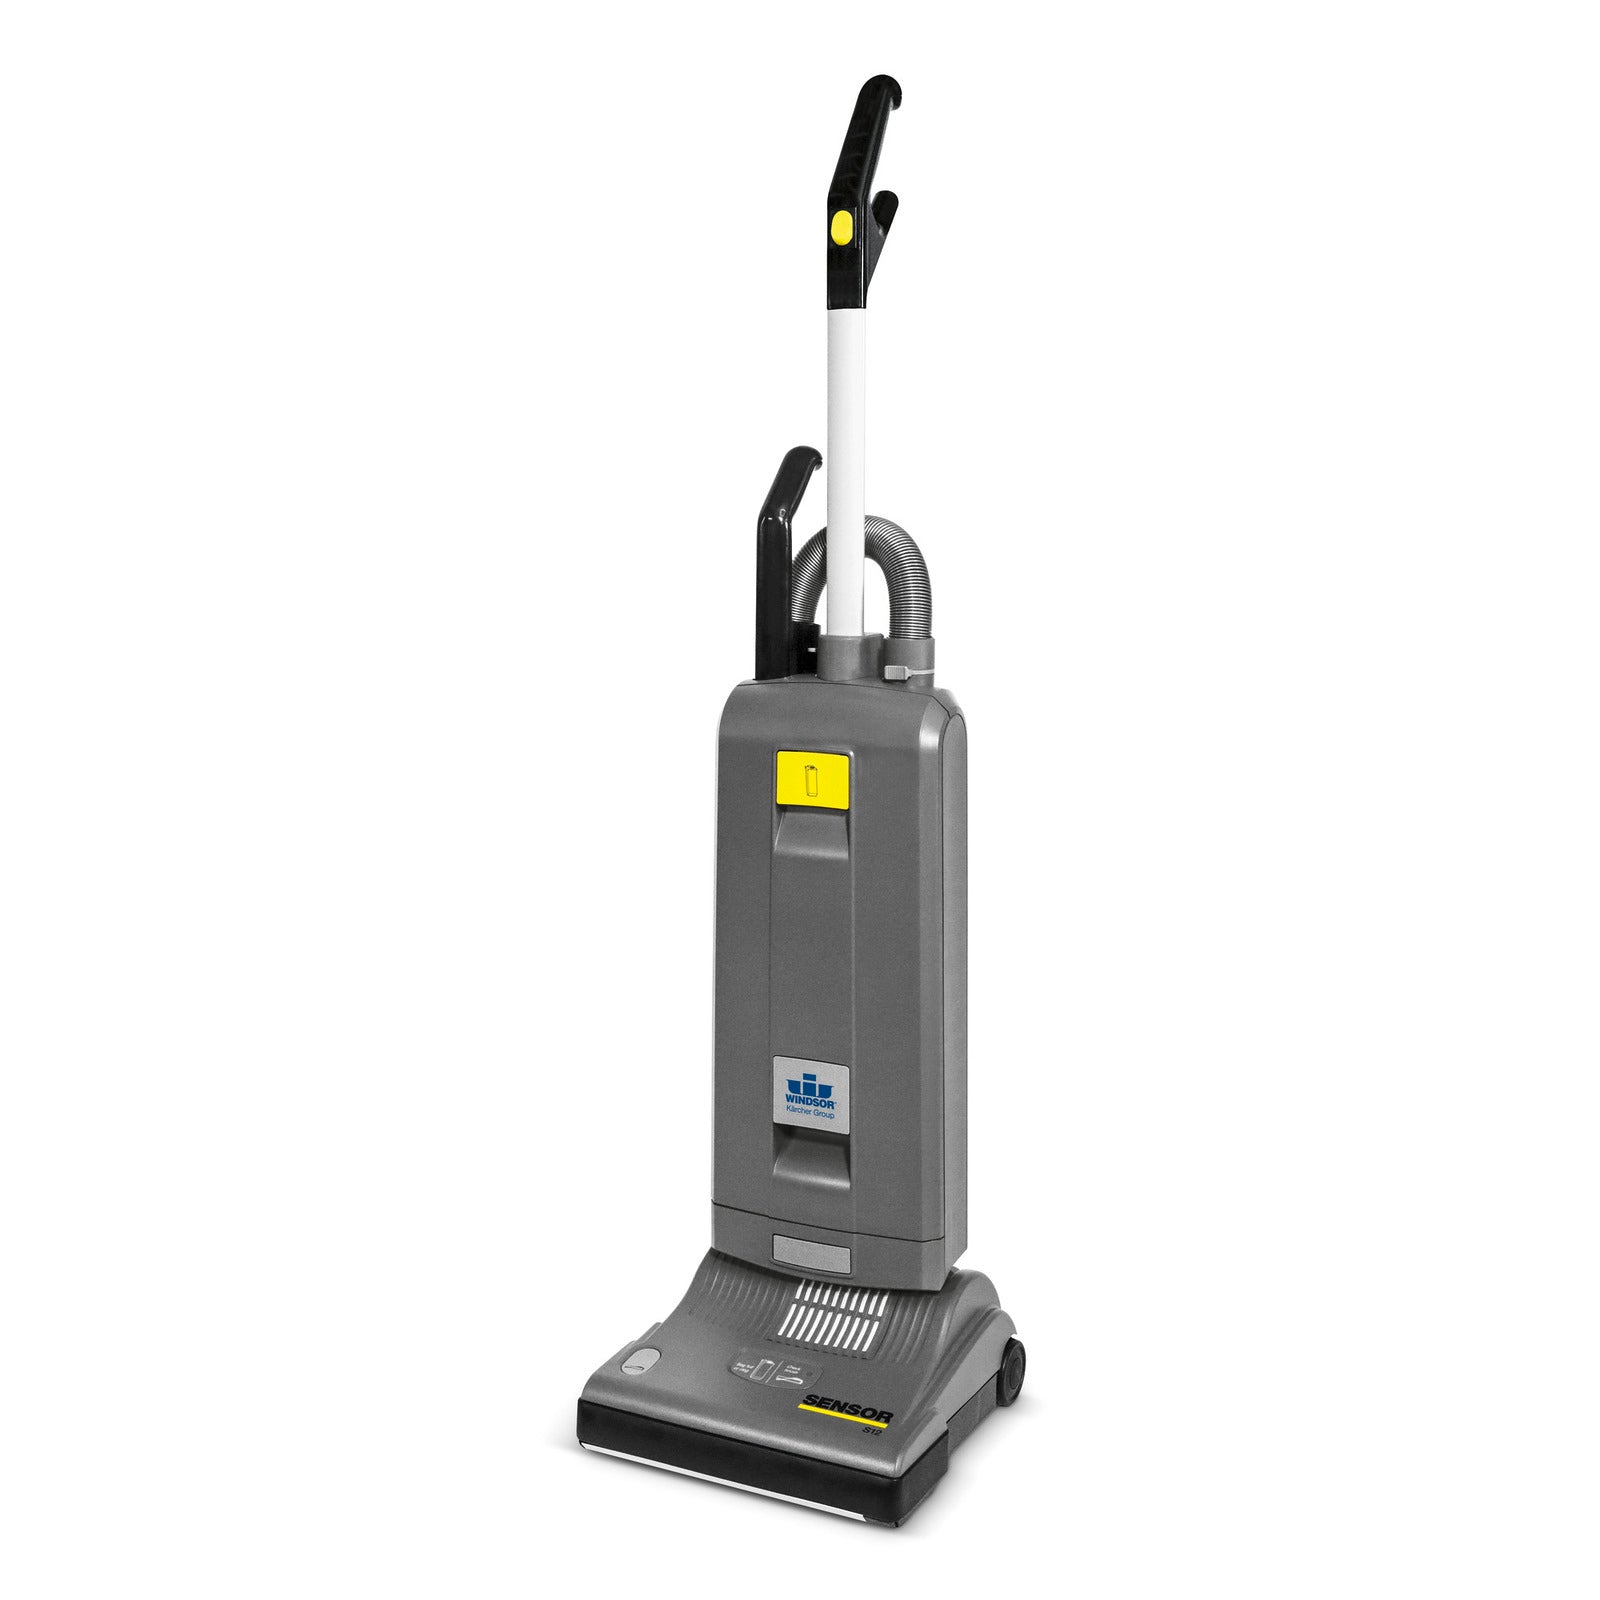 Karcher Windsor Sensor S12 Commercial Upright Vacuum, 12" Cleaning Path, New